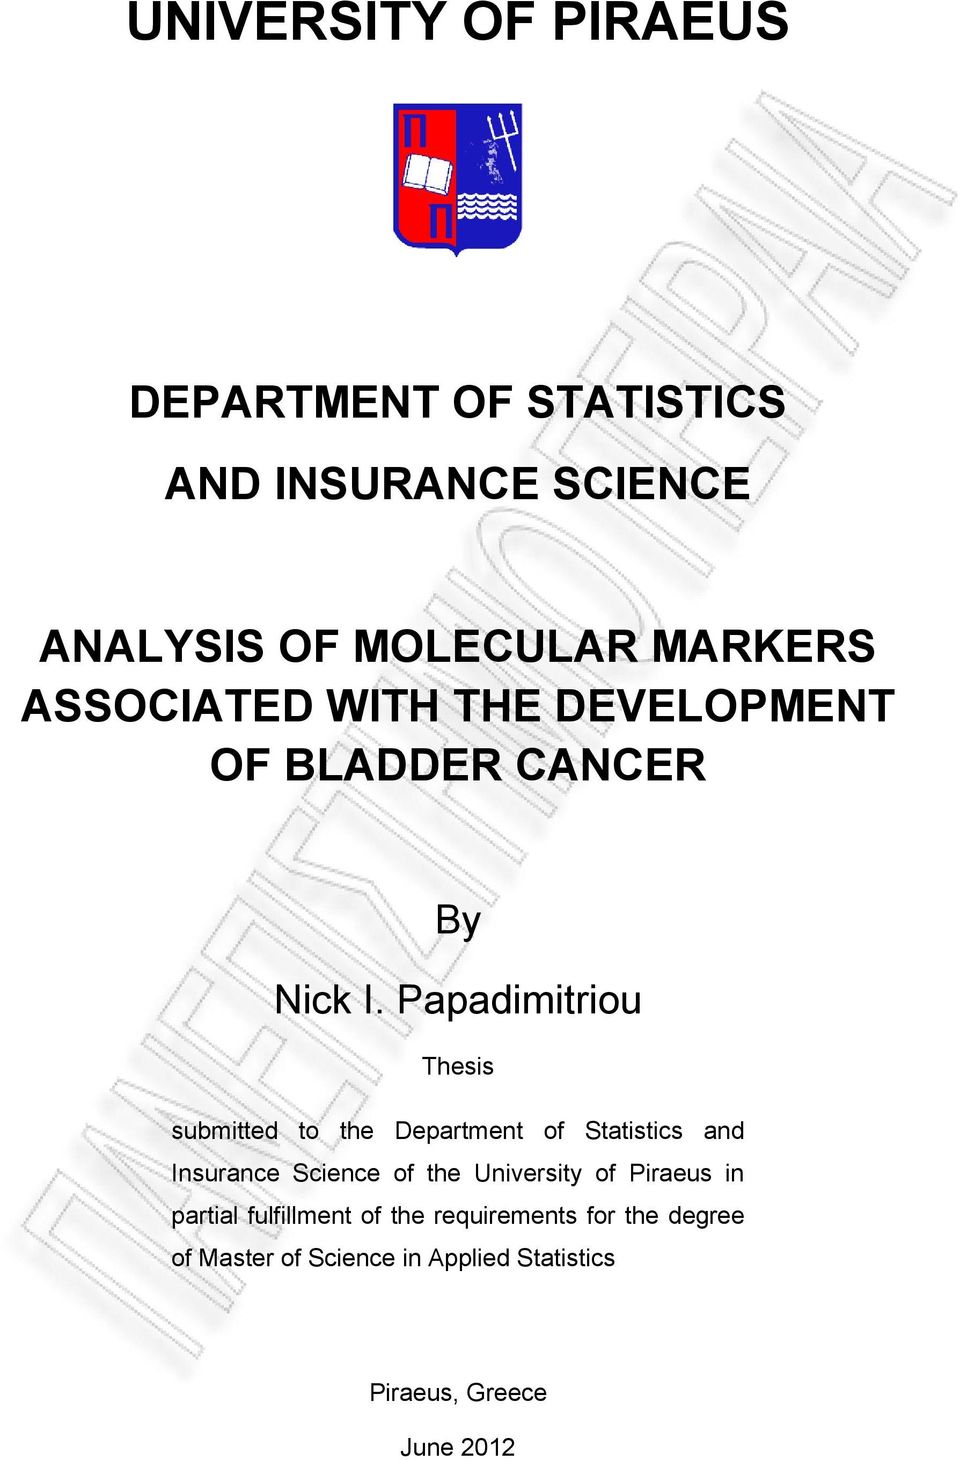 Papadimitriou Thesis submitted to the Department of Statistics and Insurance Science of the